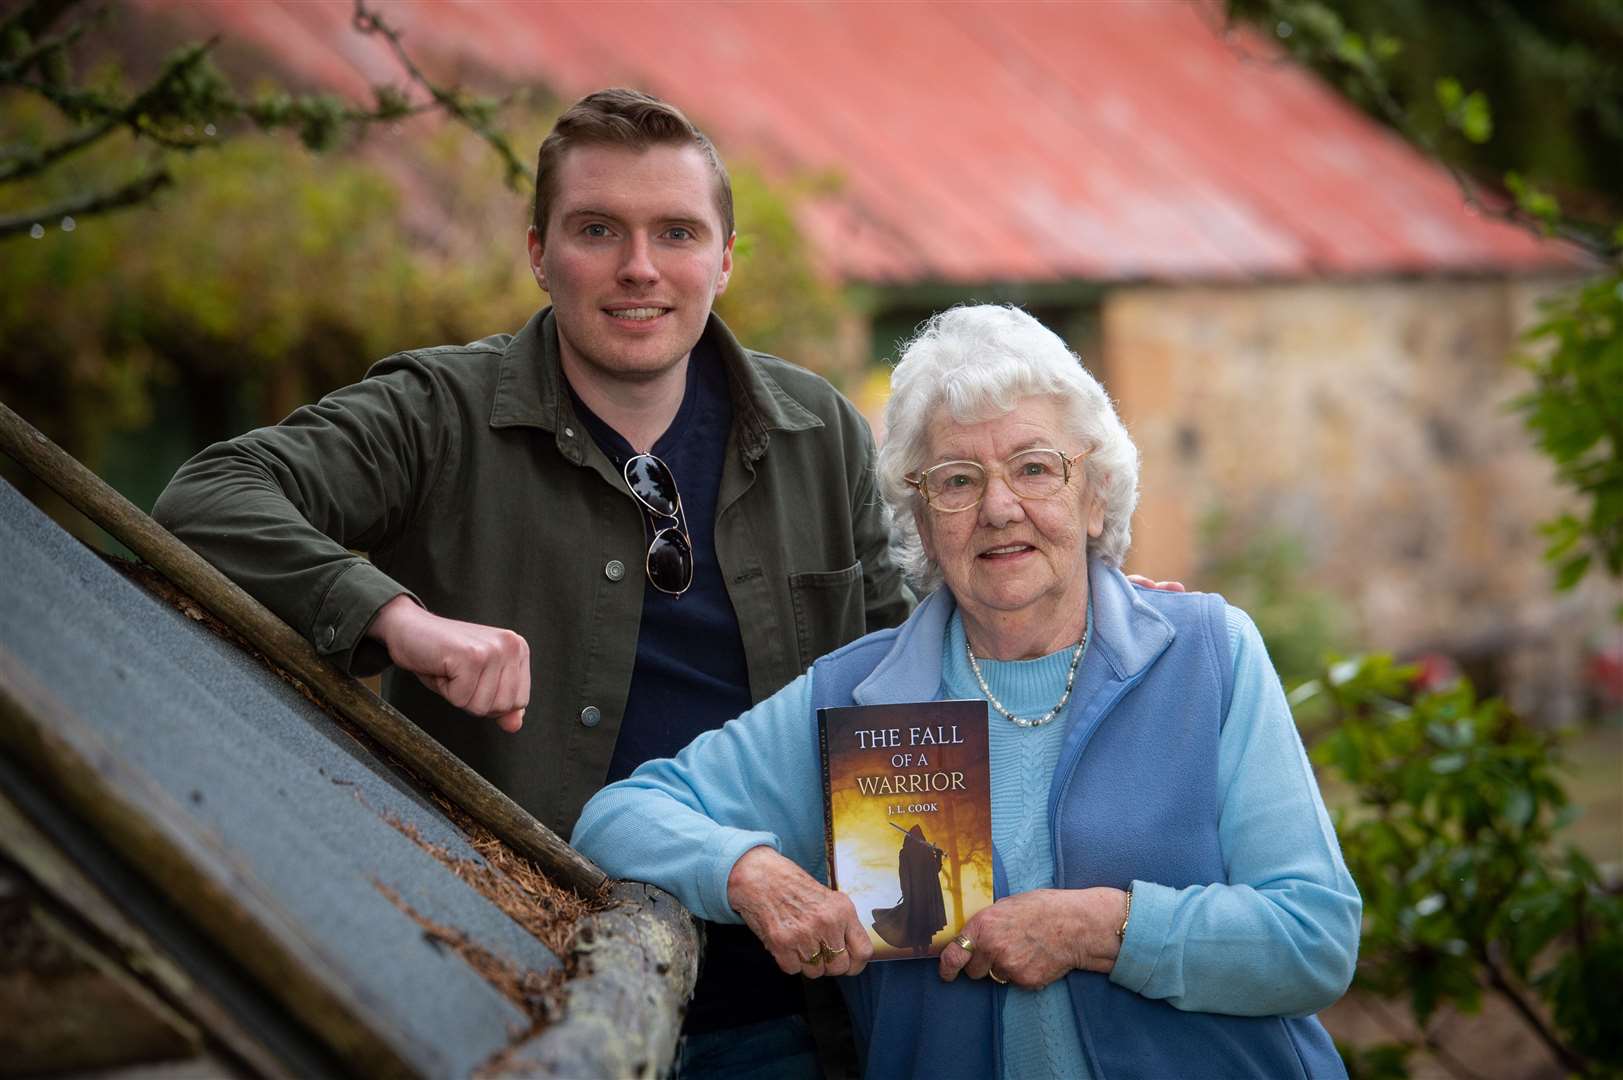 James Cook who has written his first novel, was encouraged by his granny Betty Cook. Picture: Callum Mackay